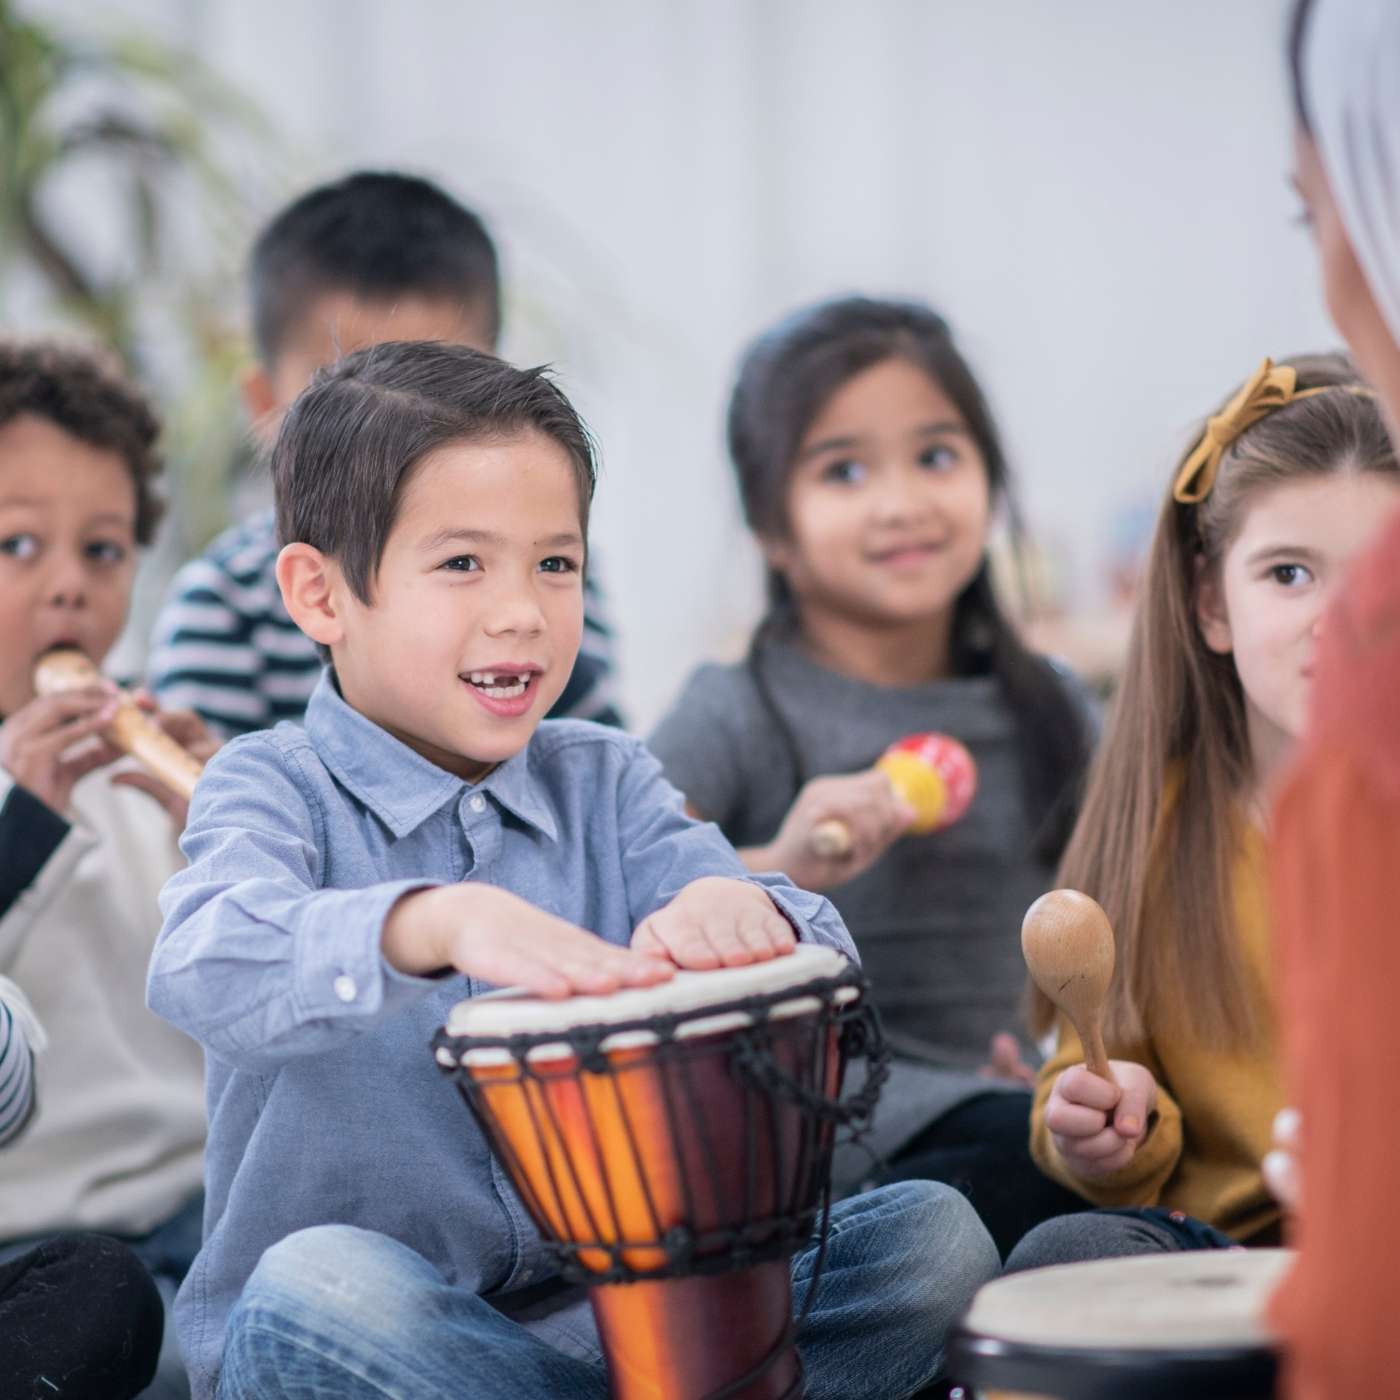 Cultural responsiveness: is music optional?